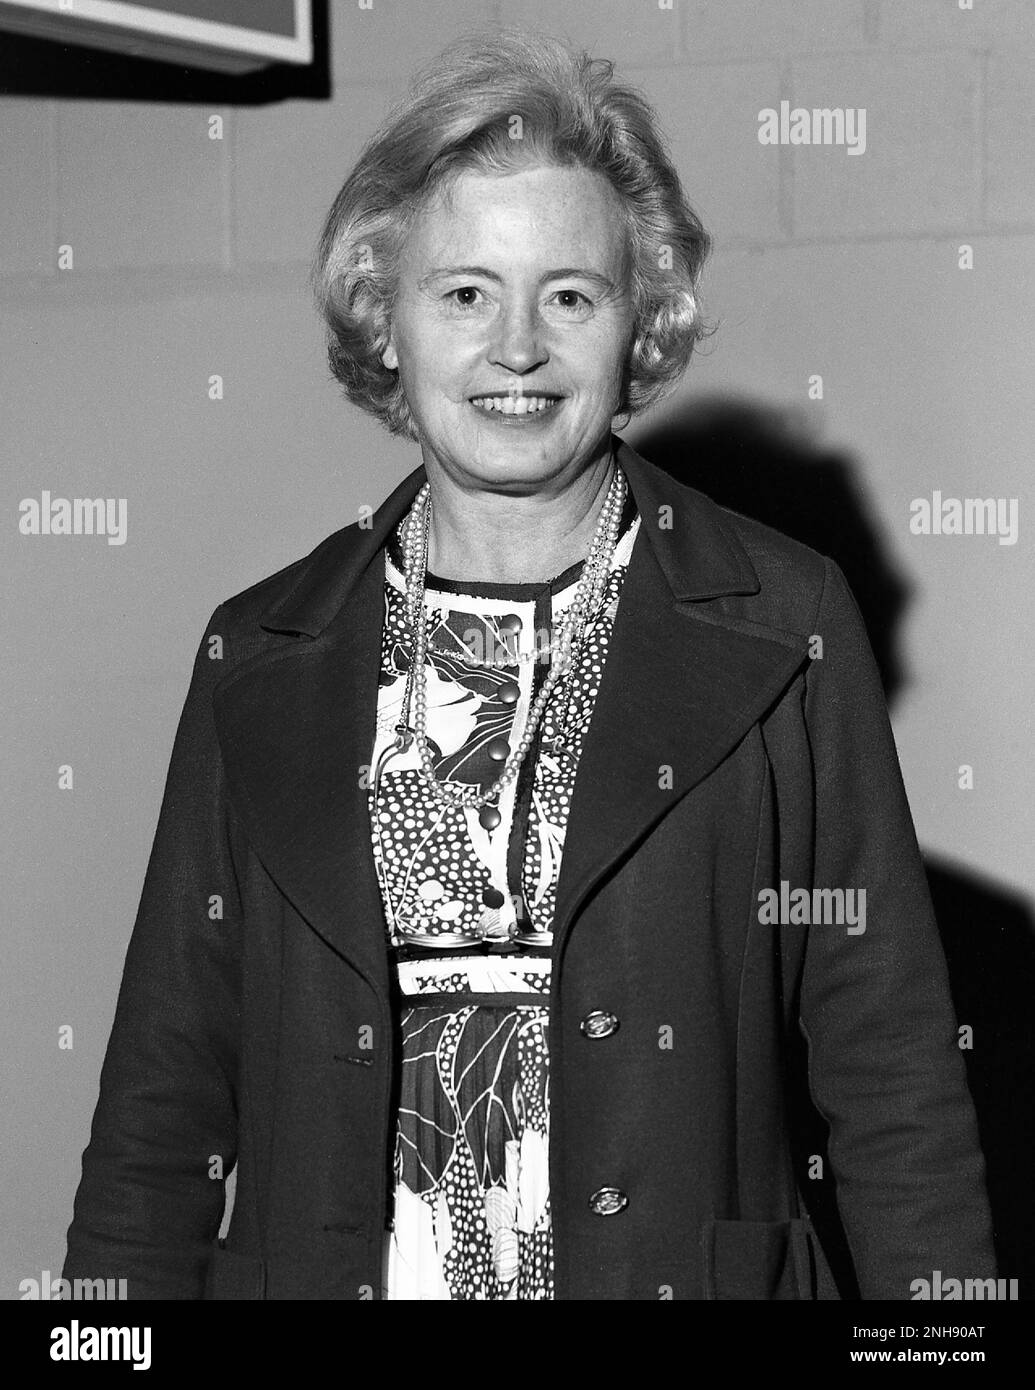 Margaret Burbidge at a guest lecture event at the Mount Holyoke College Department of Physics in spring of 1974. Eleanor Margaret Burbidge (1919-2020) was a British-American observational astronomer and astrophysicist. She was one of the founders of stellar nucleosynthesis, worked on galaxy rotation curves and quasars, and helped develop the Faint Object Spectrograph on the Hubble Space Telescope. Stock Photo